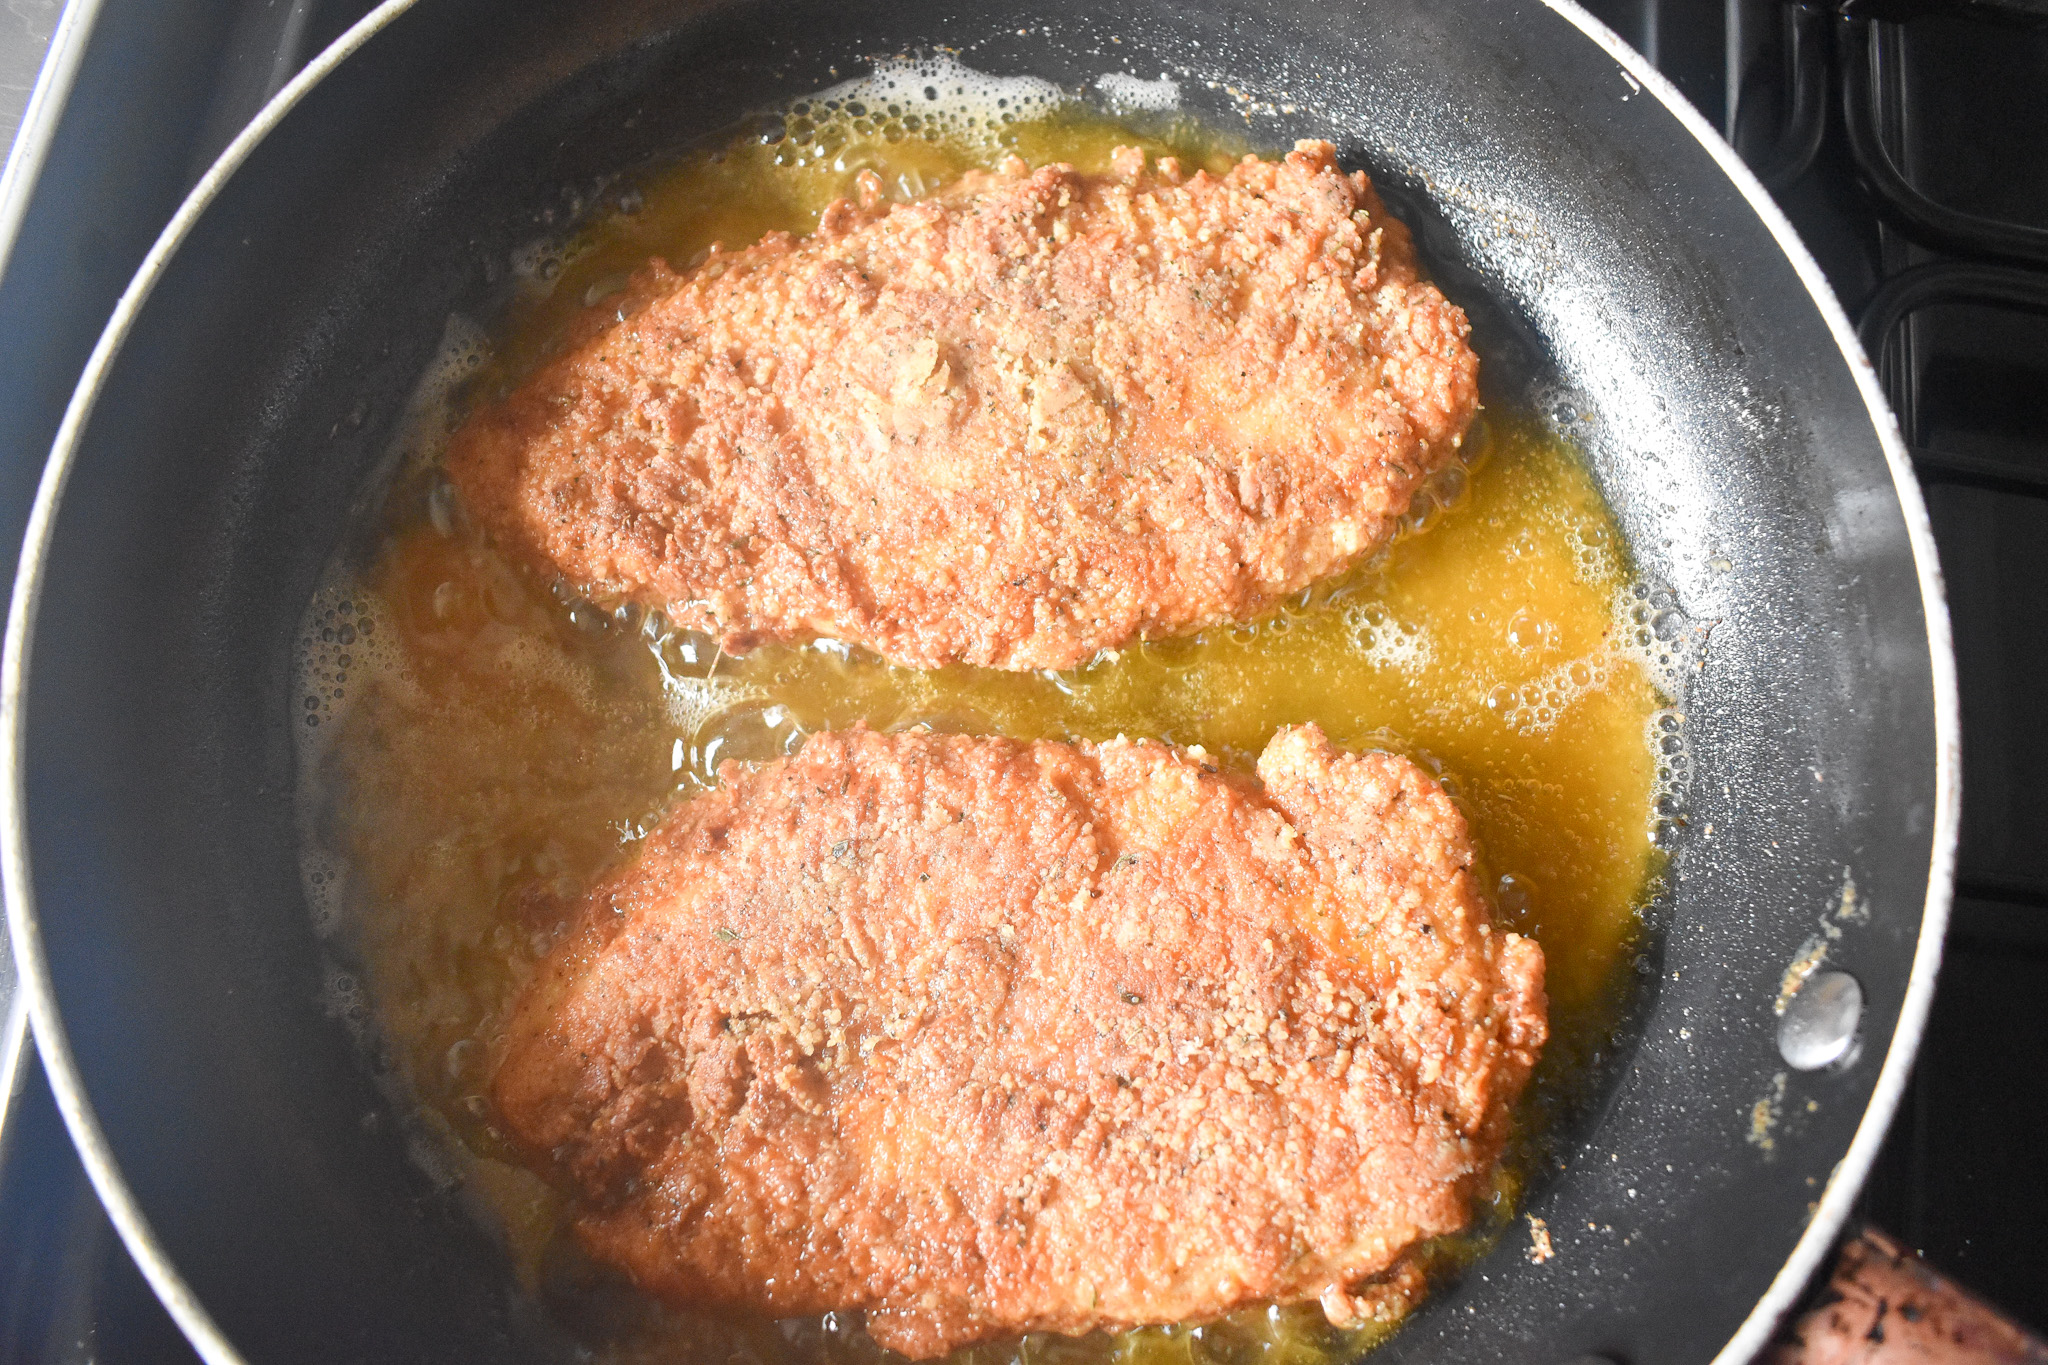 2 chicken breast pieces cooking in frying pan.